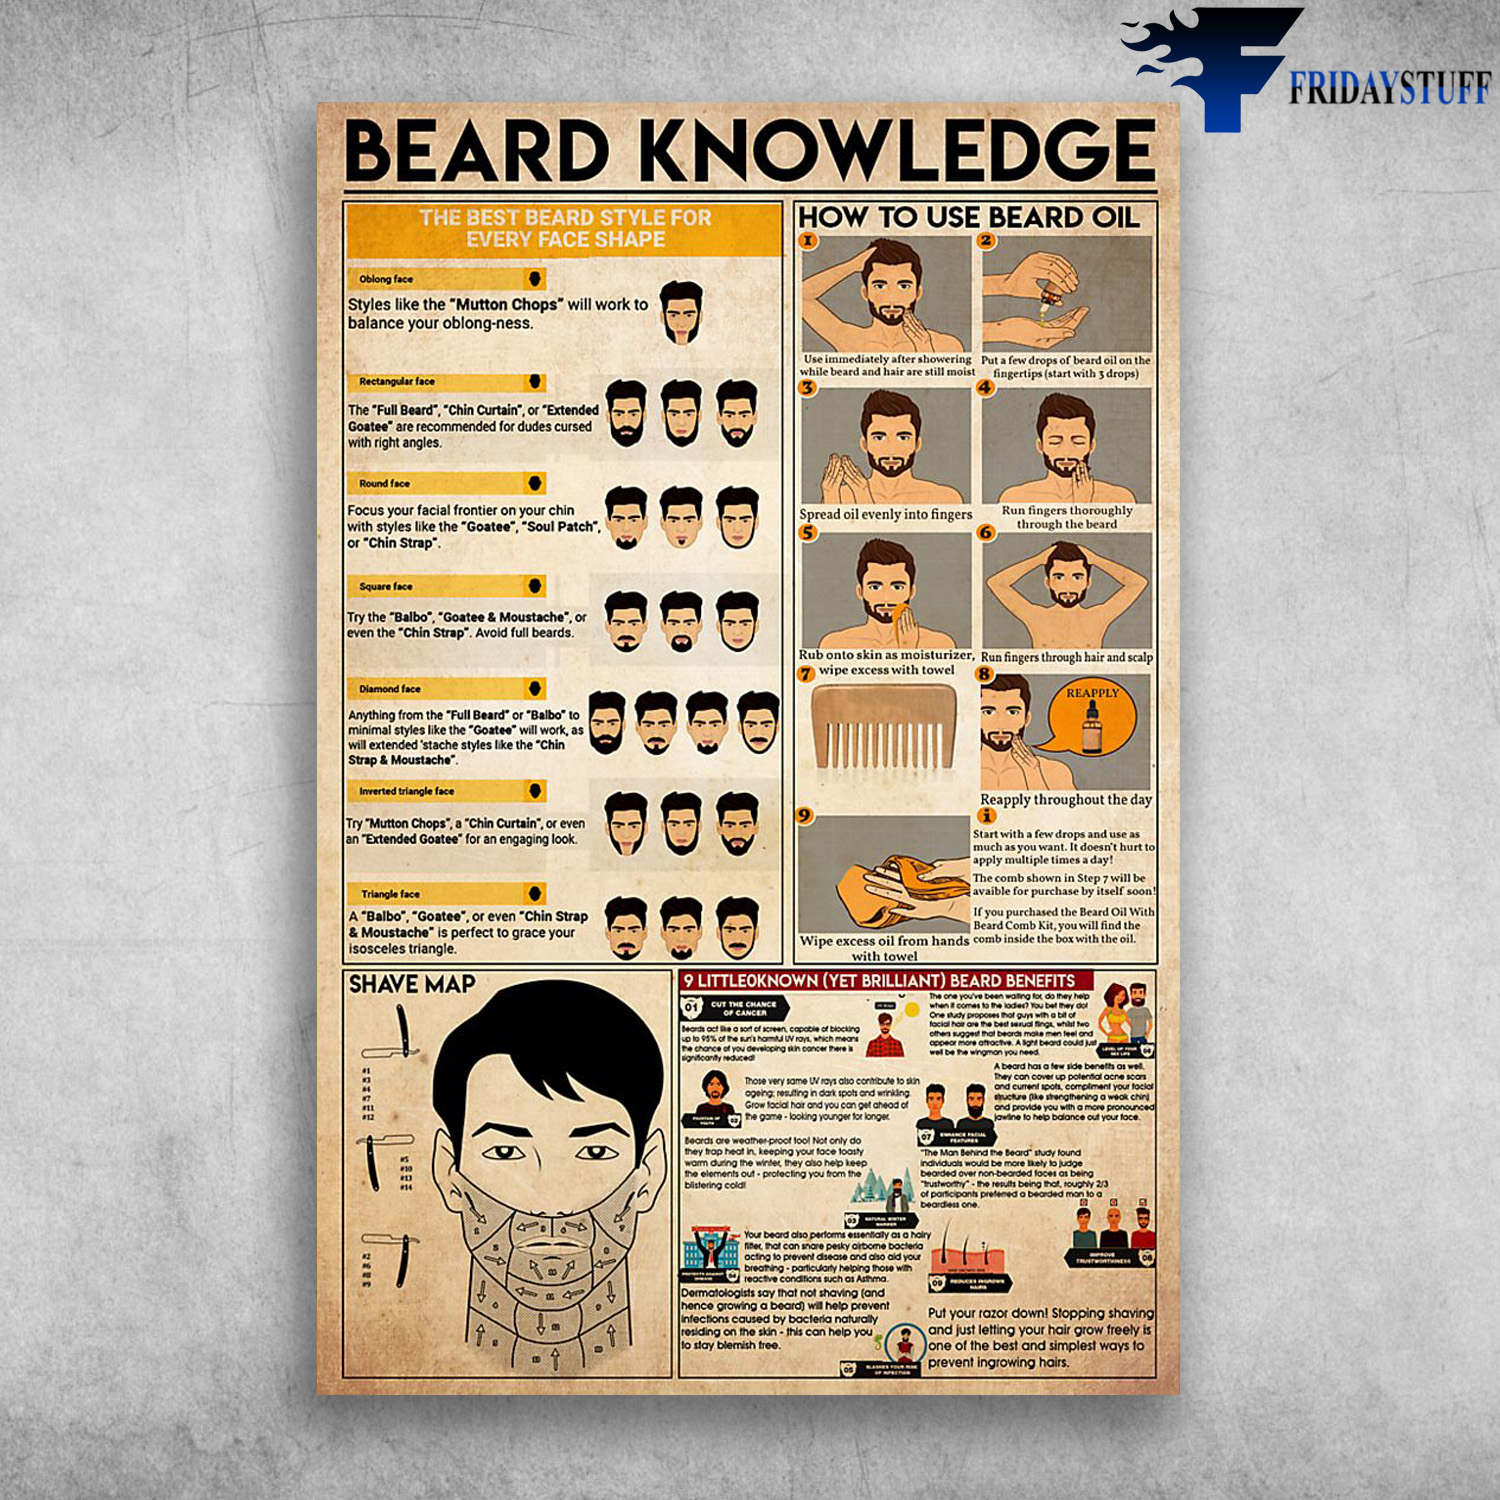 Beard Knowledge The Best Beard Style For Every Face Shape